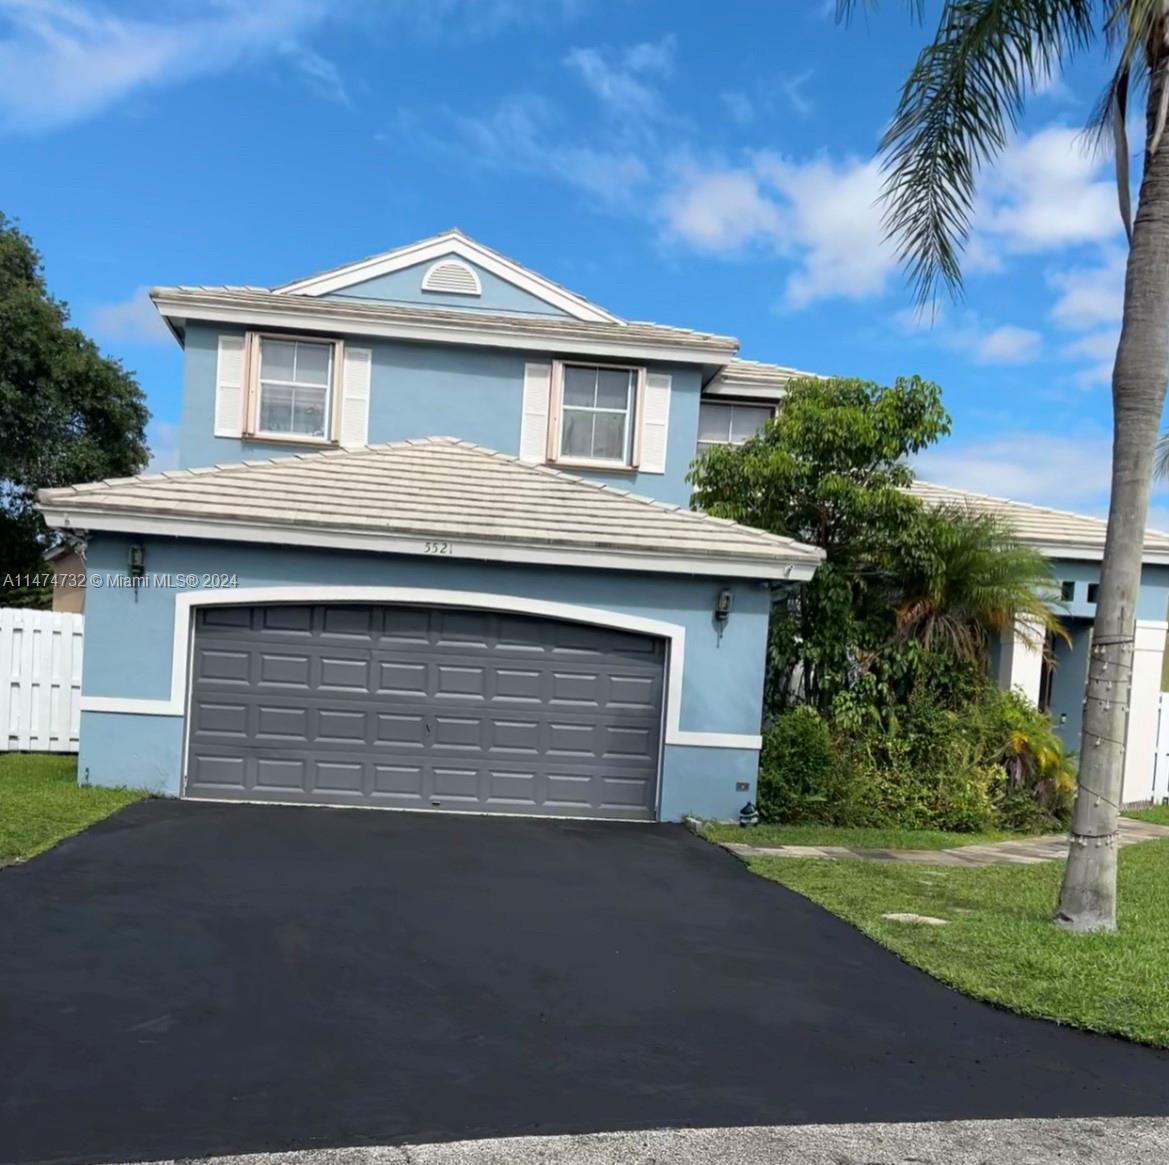 Photo of 5521 NW 54th Ln in Coconut Creek, FL